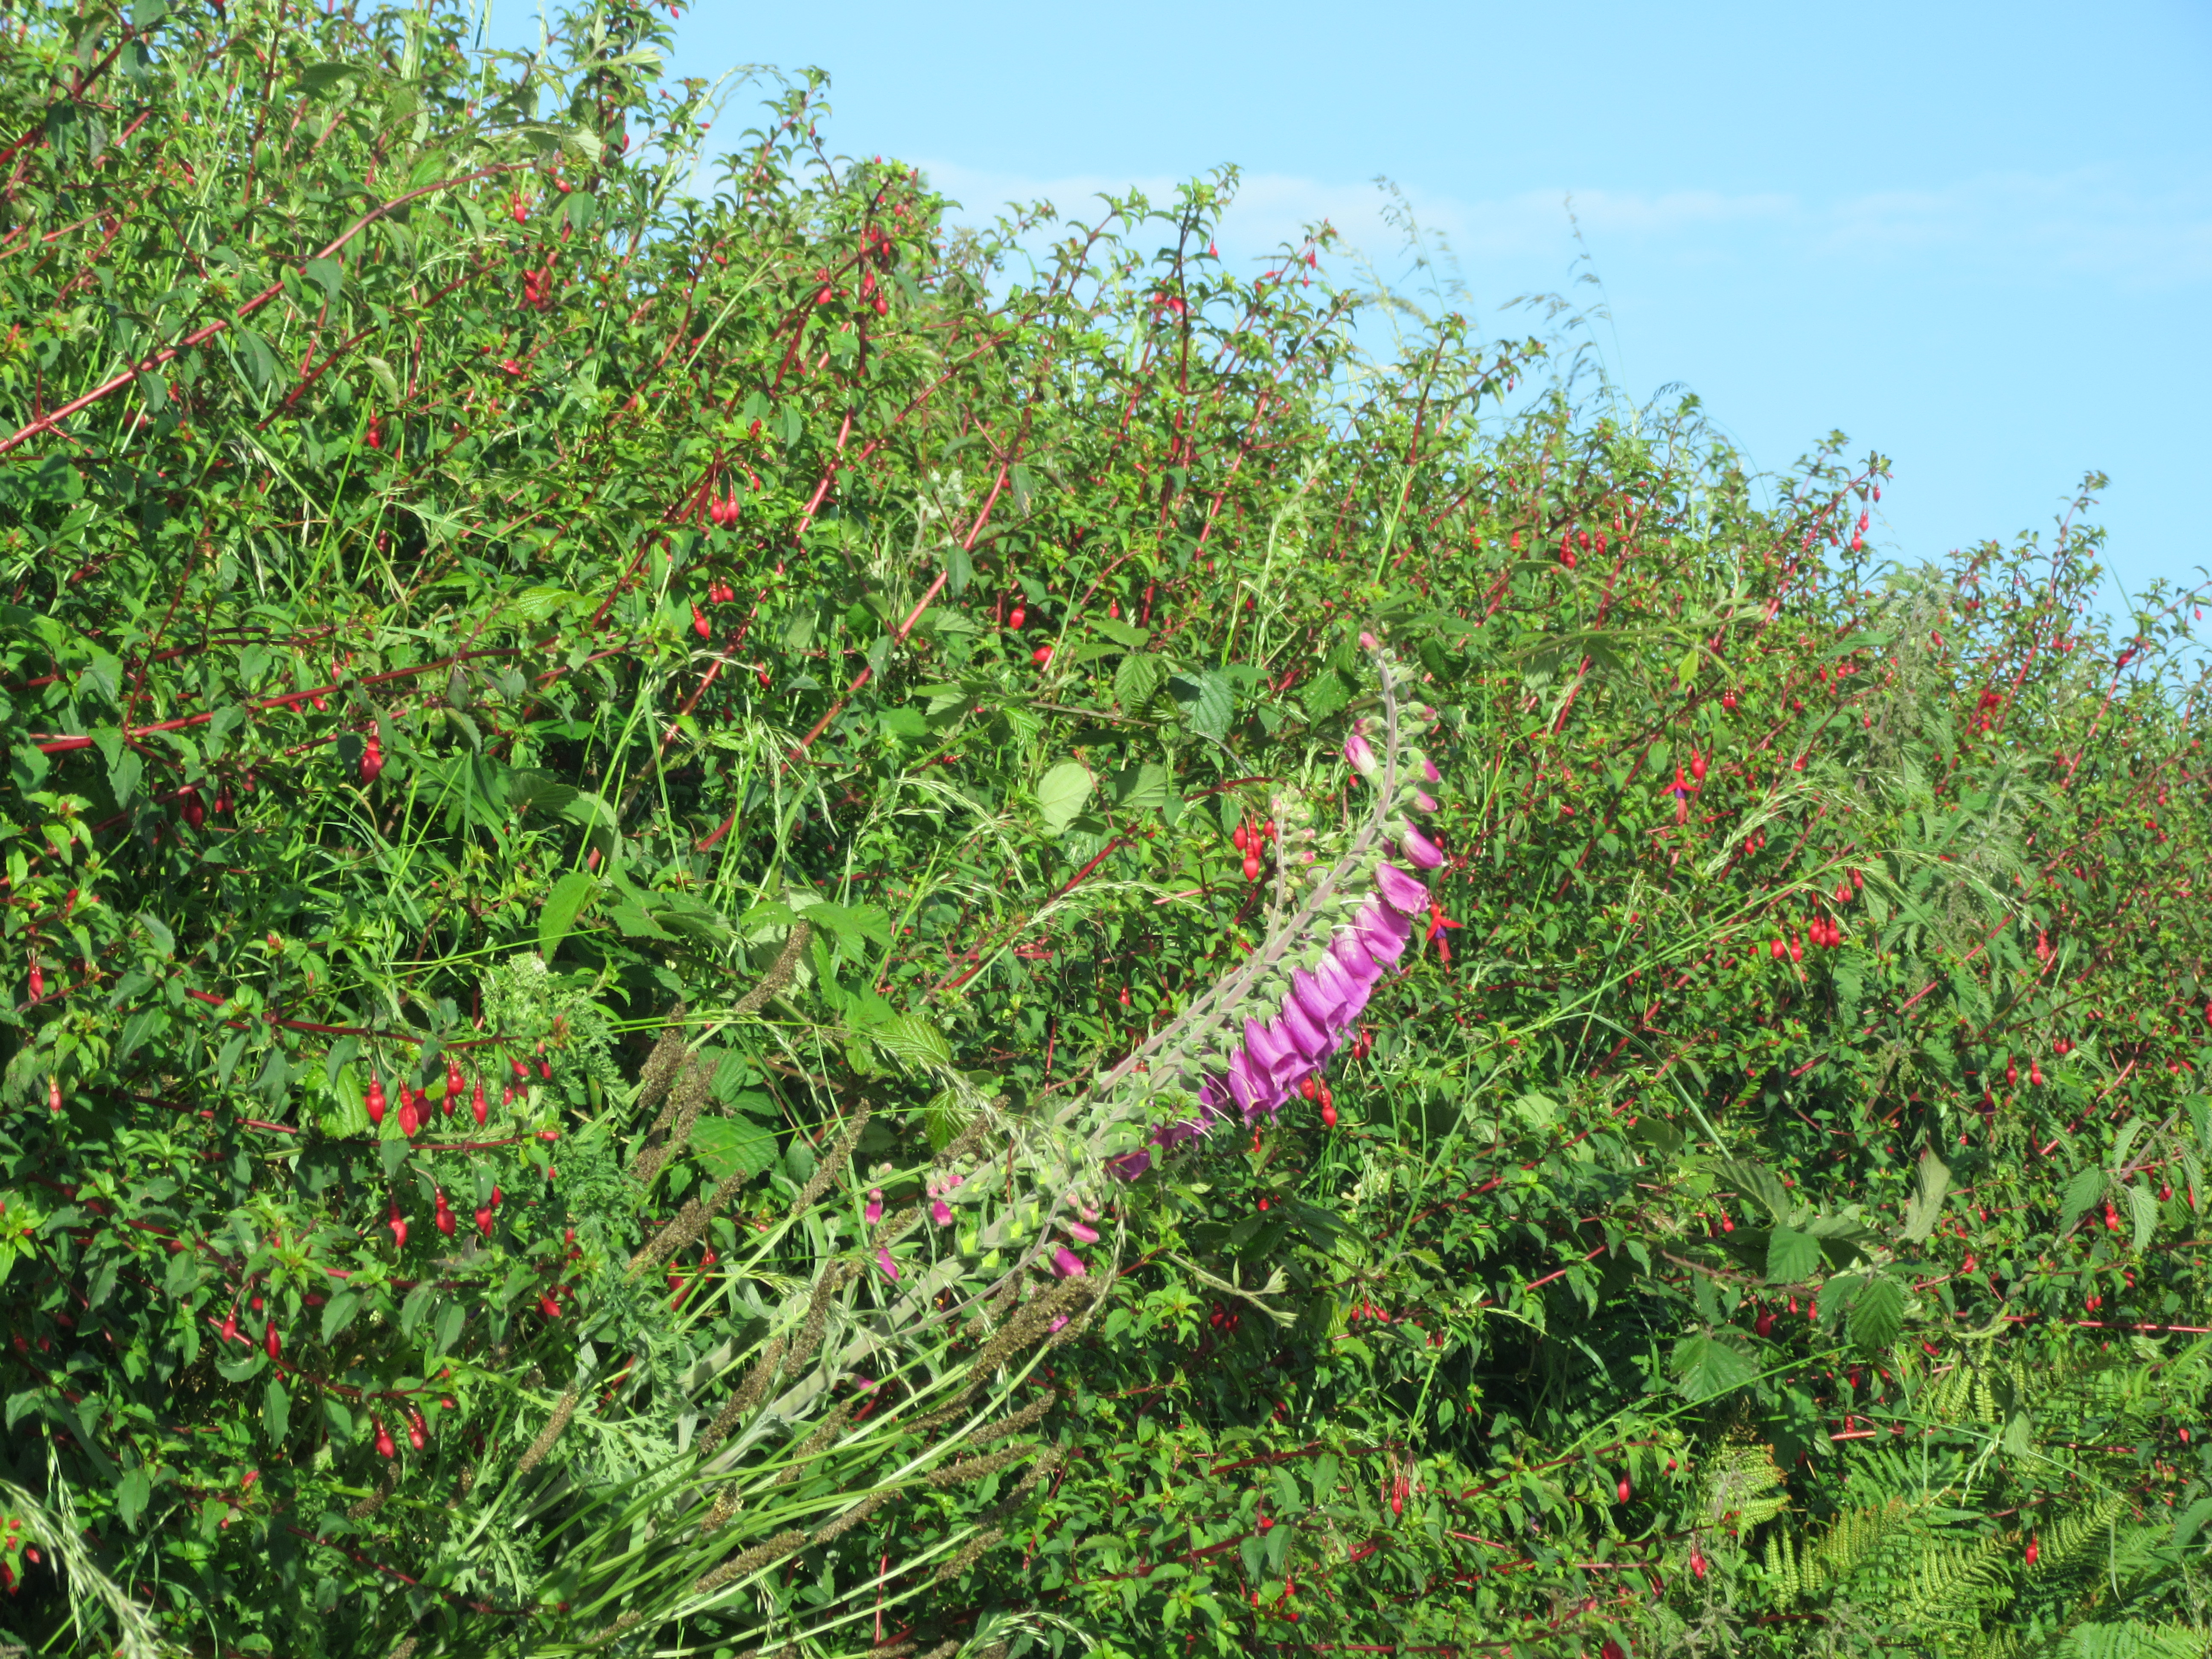 Hedgerows filled with wild fuchsia and foxglove